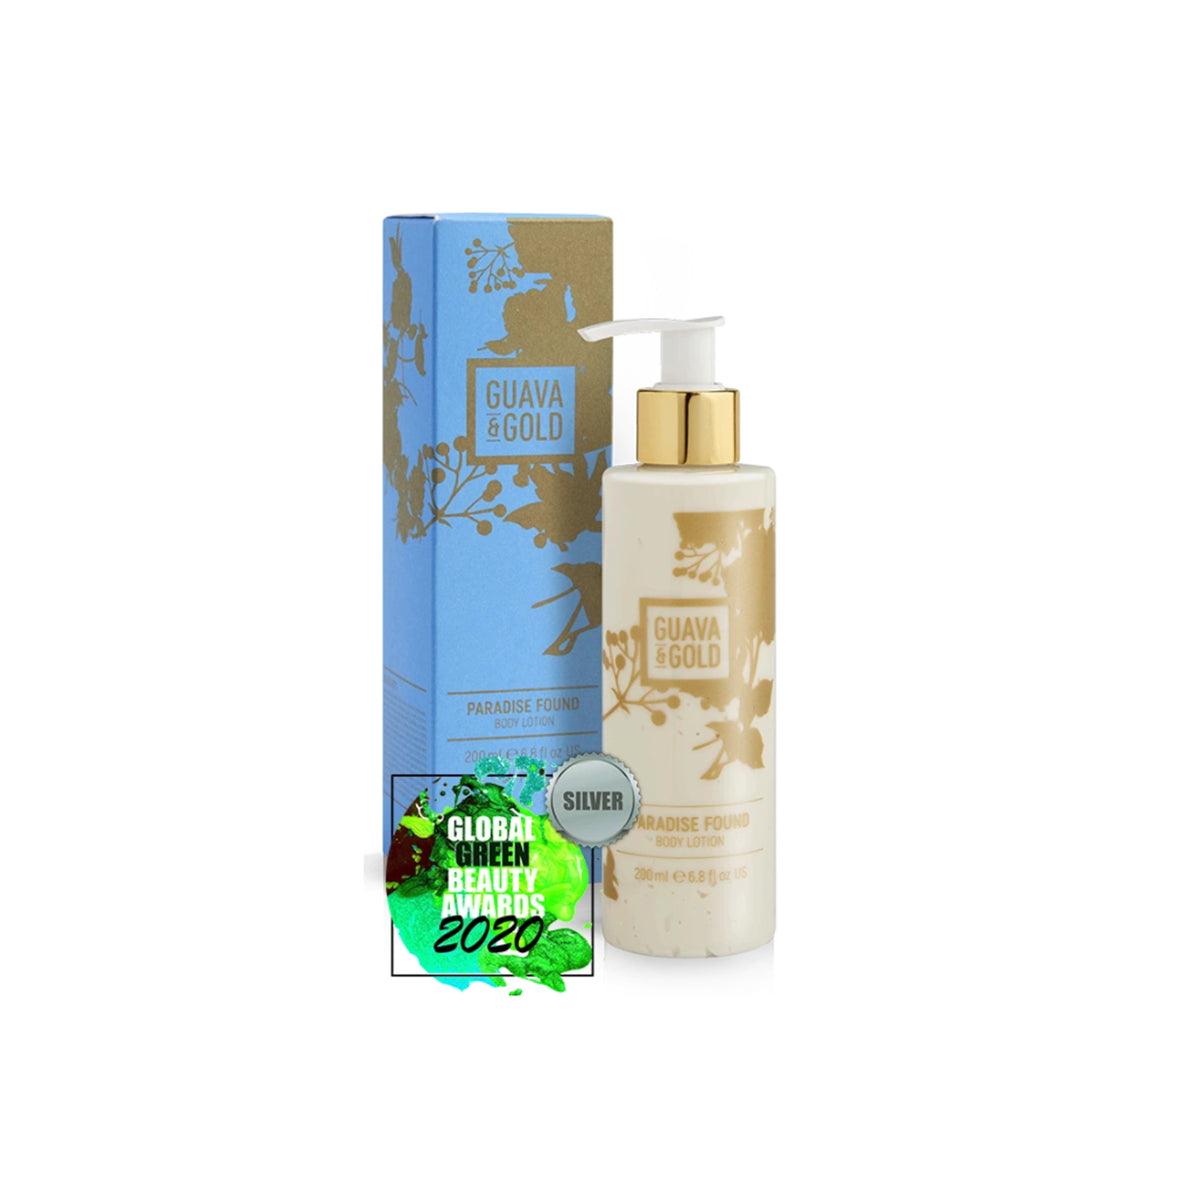 blue and gold printed bottle and box of body lotion by Guava and Gold